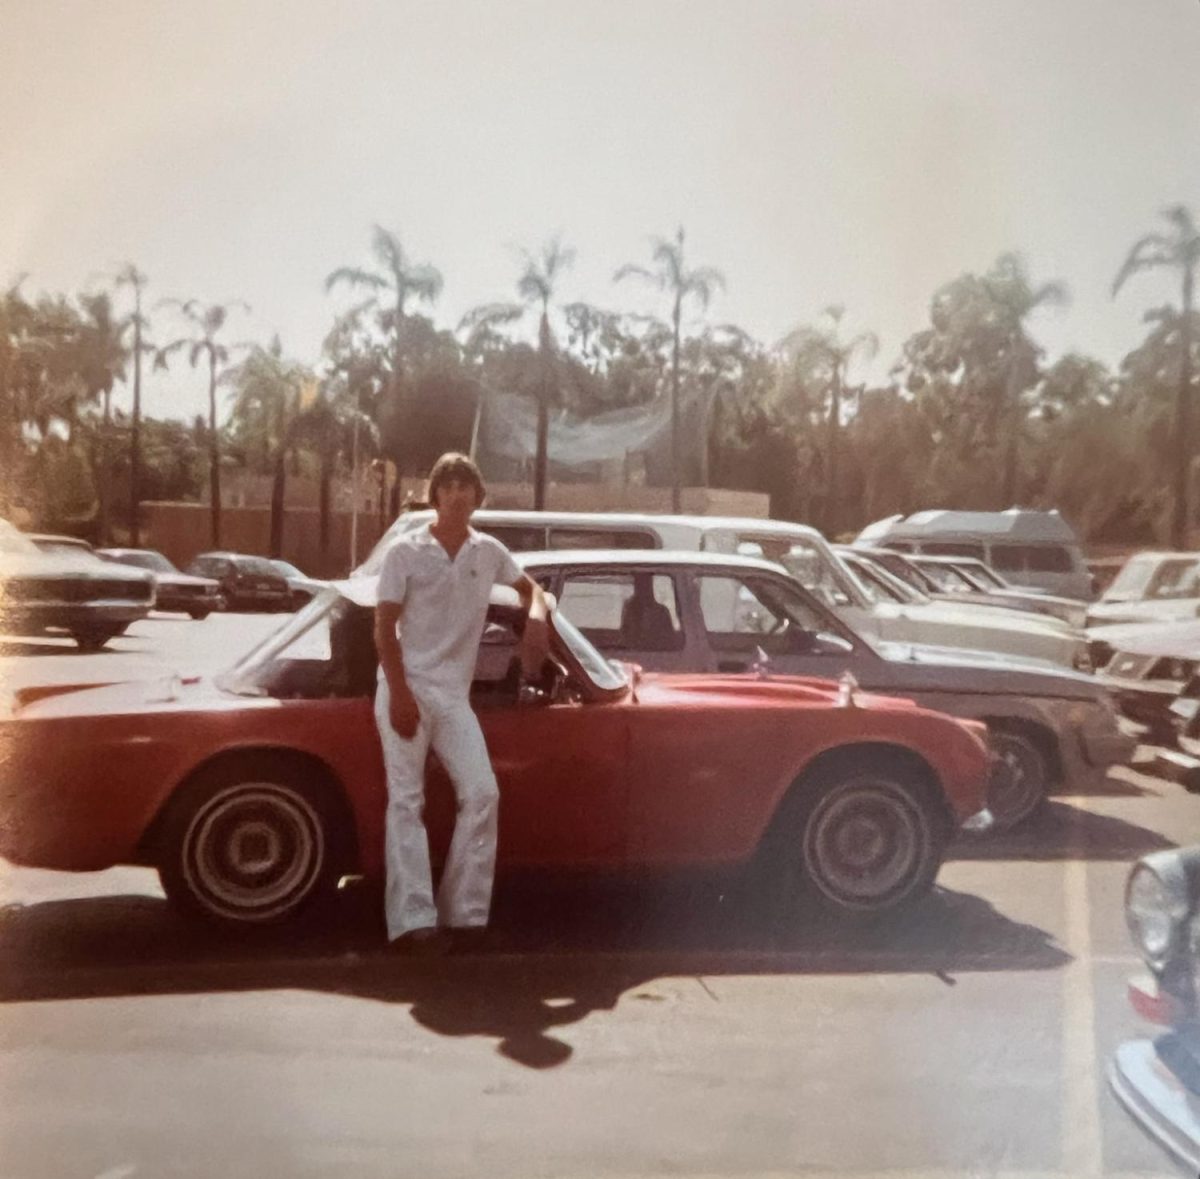 Janitor Darryl Bryant poses beside his rare 1964 TR4 in 1984. It was the first car he ever owned and considered a classic car at the time, and even more so now. “I’ve always been with cars,” Byrant said. “Back in my day when you were fifteen you had a drivers license. My parents bought me a 1964 TR4, it was broken, it didn’t have an engine, and I rebuilt it myself, that’s how I got into it. I’ve always loved cars, engines, things that go fast, in a straight line, 400 mph in about 2 seconds.” 